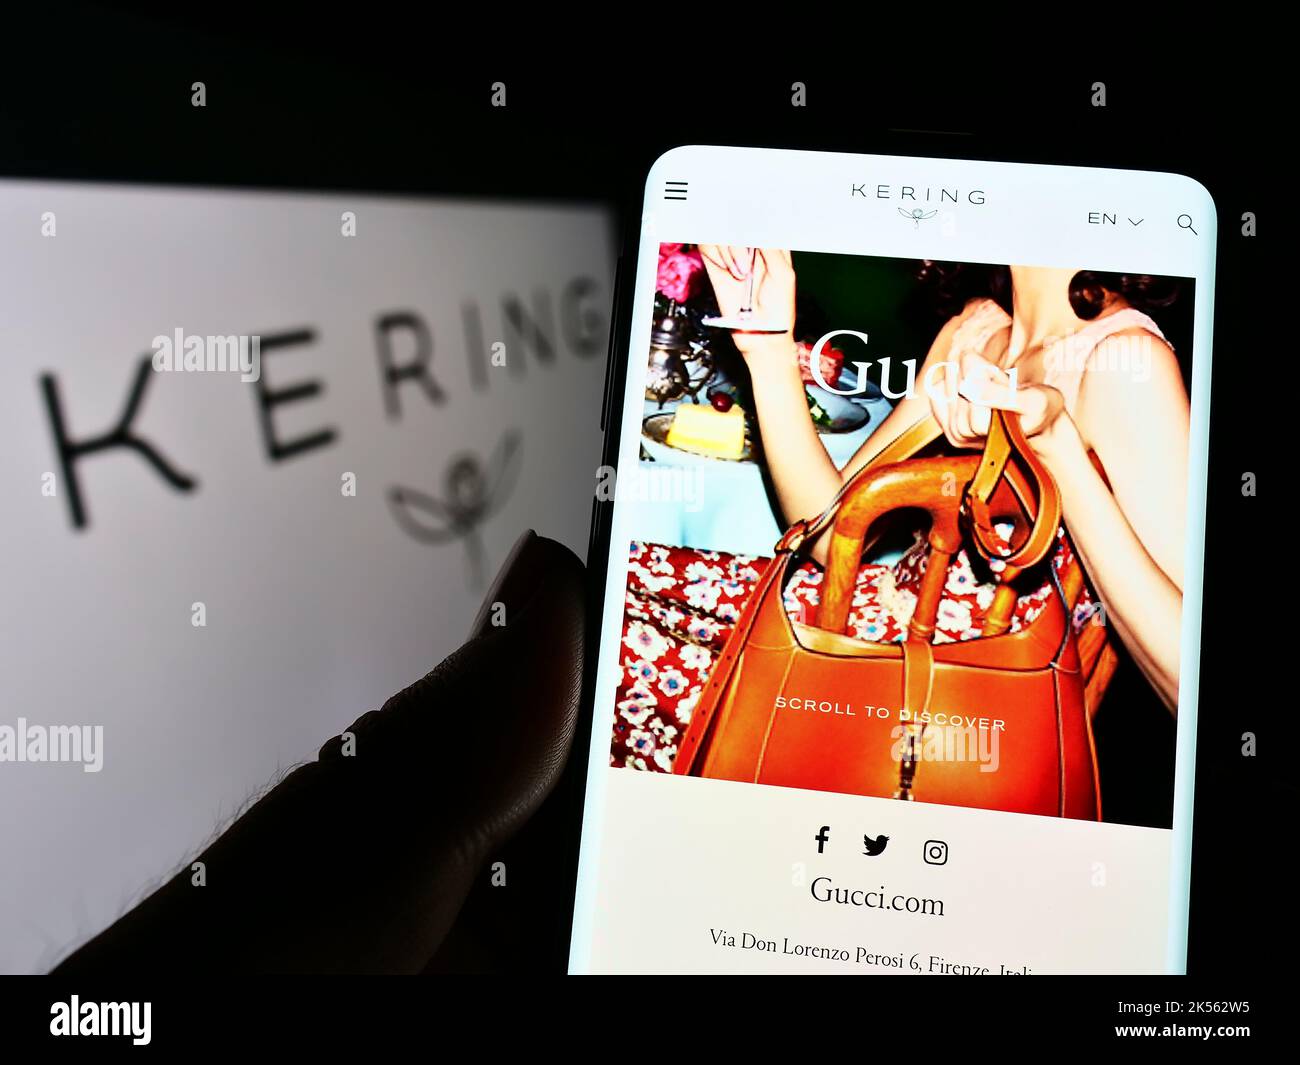 Person holding smartphone with webpage of French luxury goods company Kering S.A. on screen in front of logo. Focus on center of phone display. Stock Photo